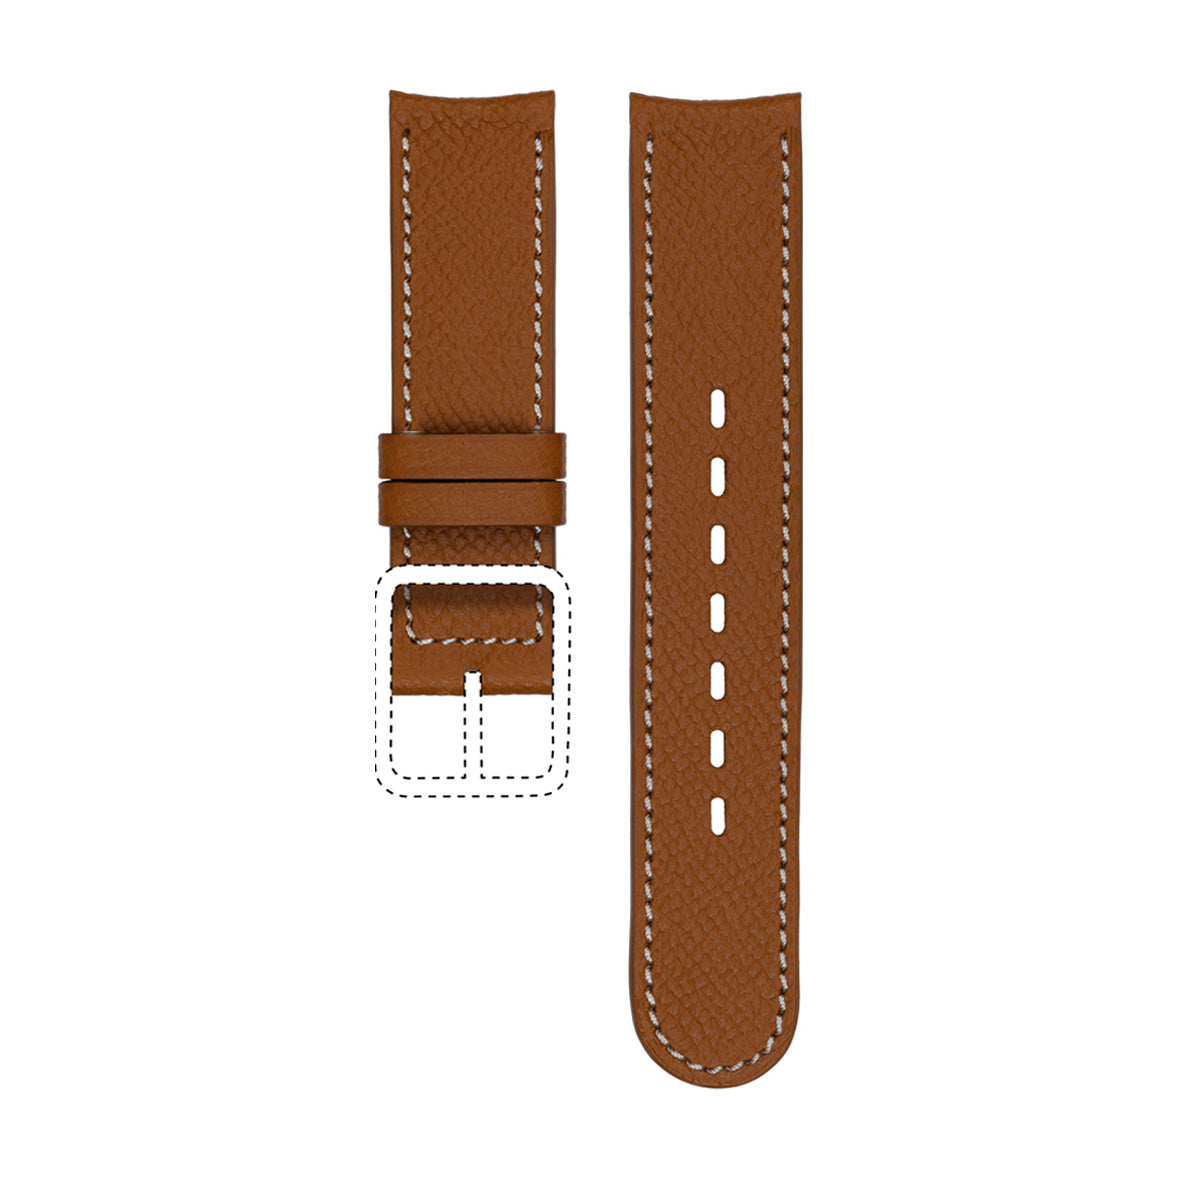 Grained Leather Strap for TYPE 1 and TYPE 8